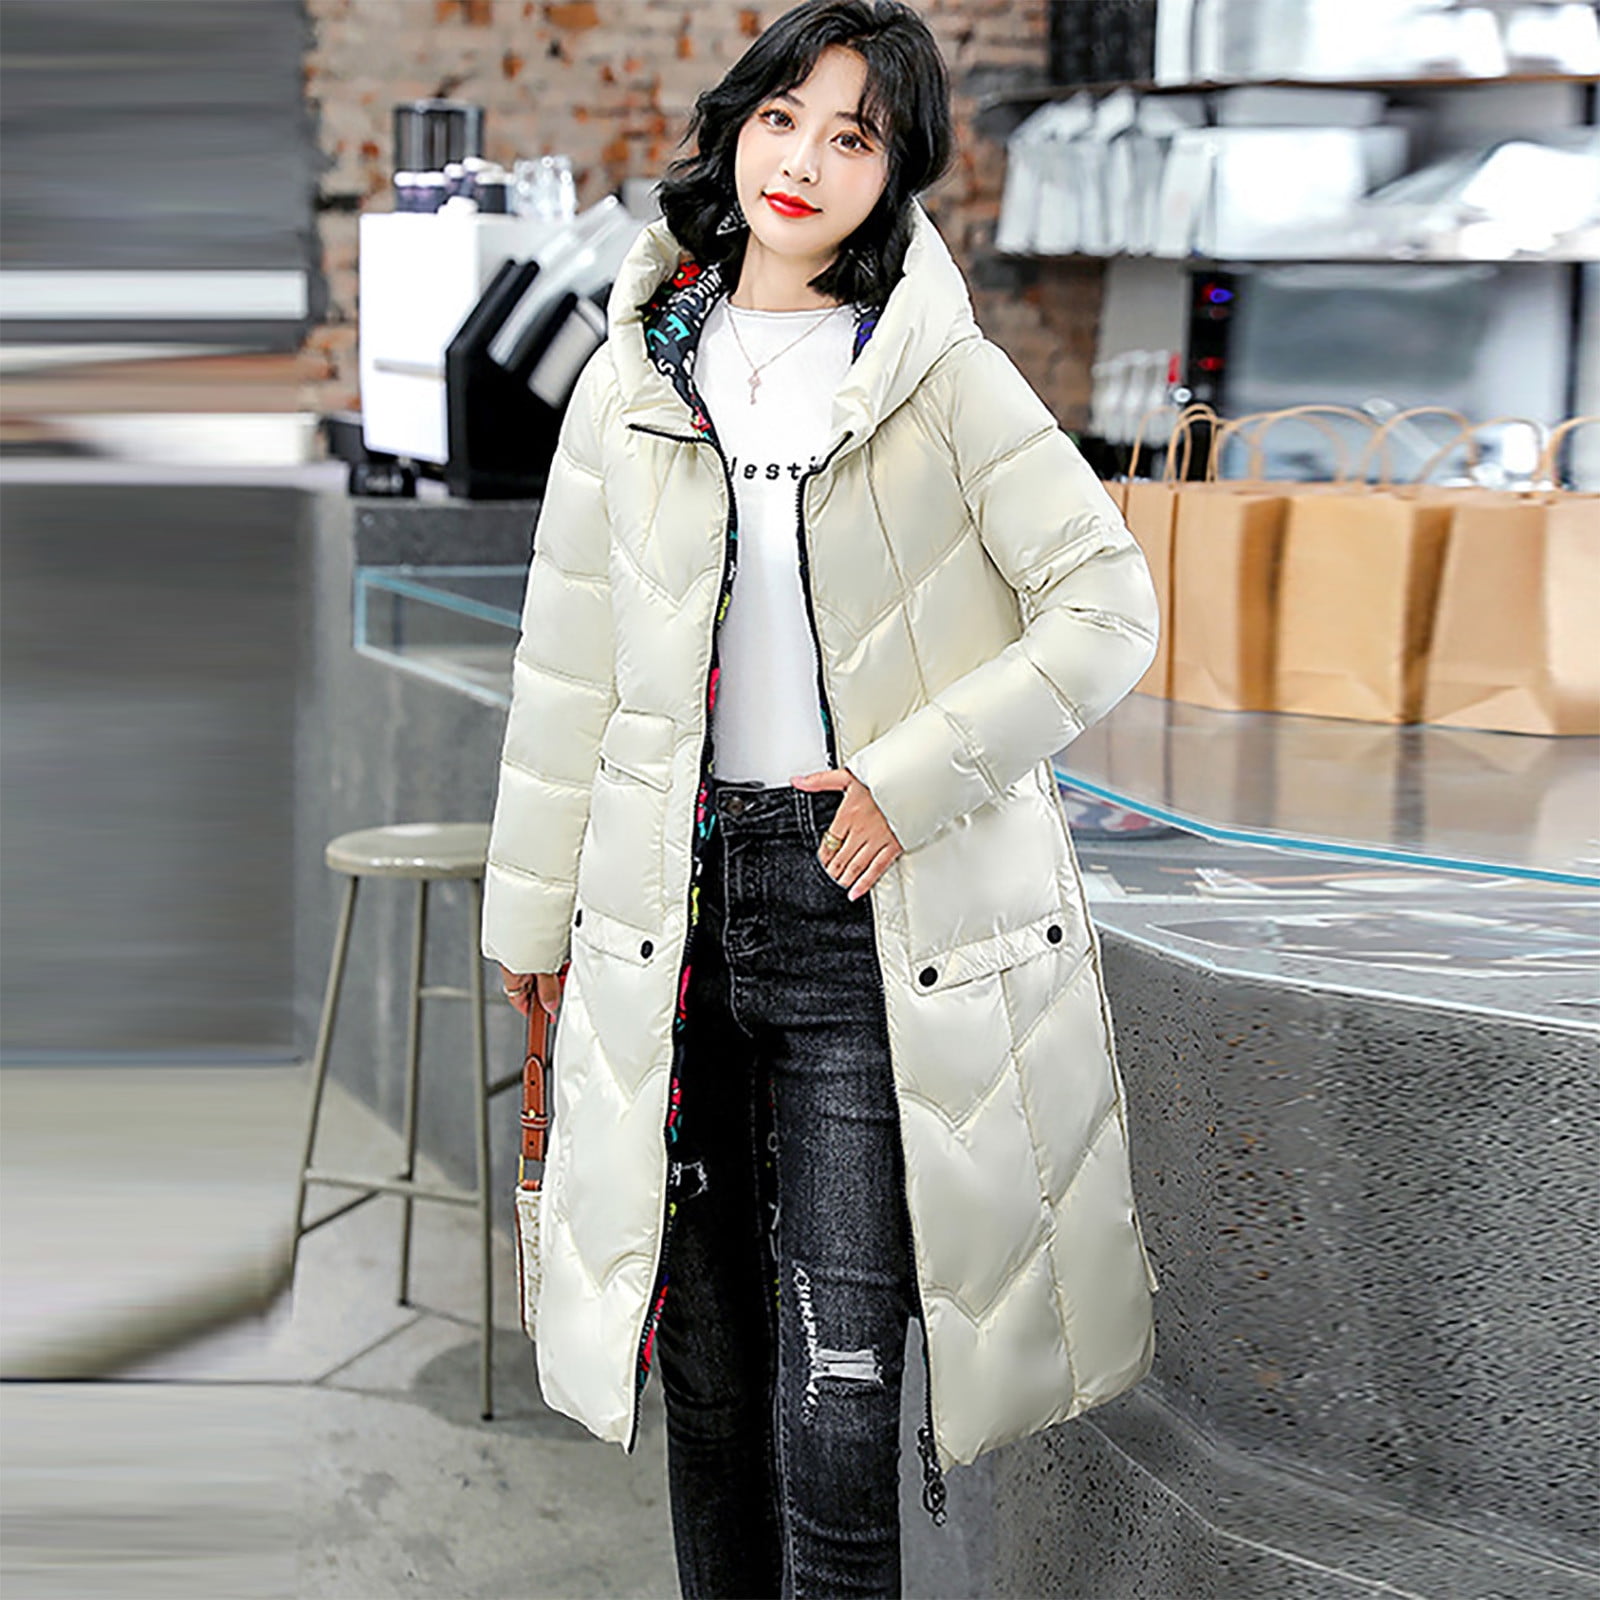 LAWOR Plus Size Coats Winter Clearance Winter Trendy Woman Lengthened Thickened Length Down Cotton Jacket Fall Savings Z Walmart.com